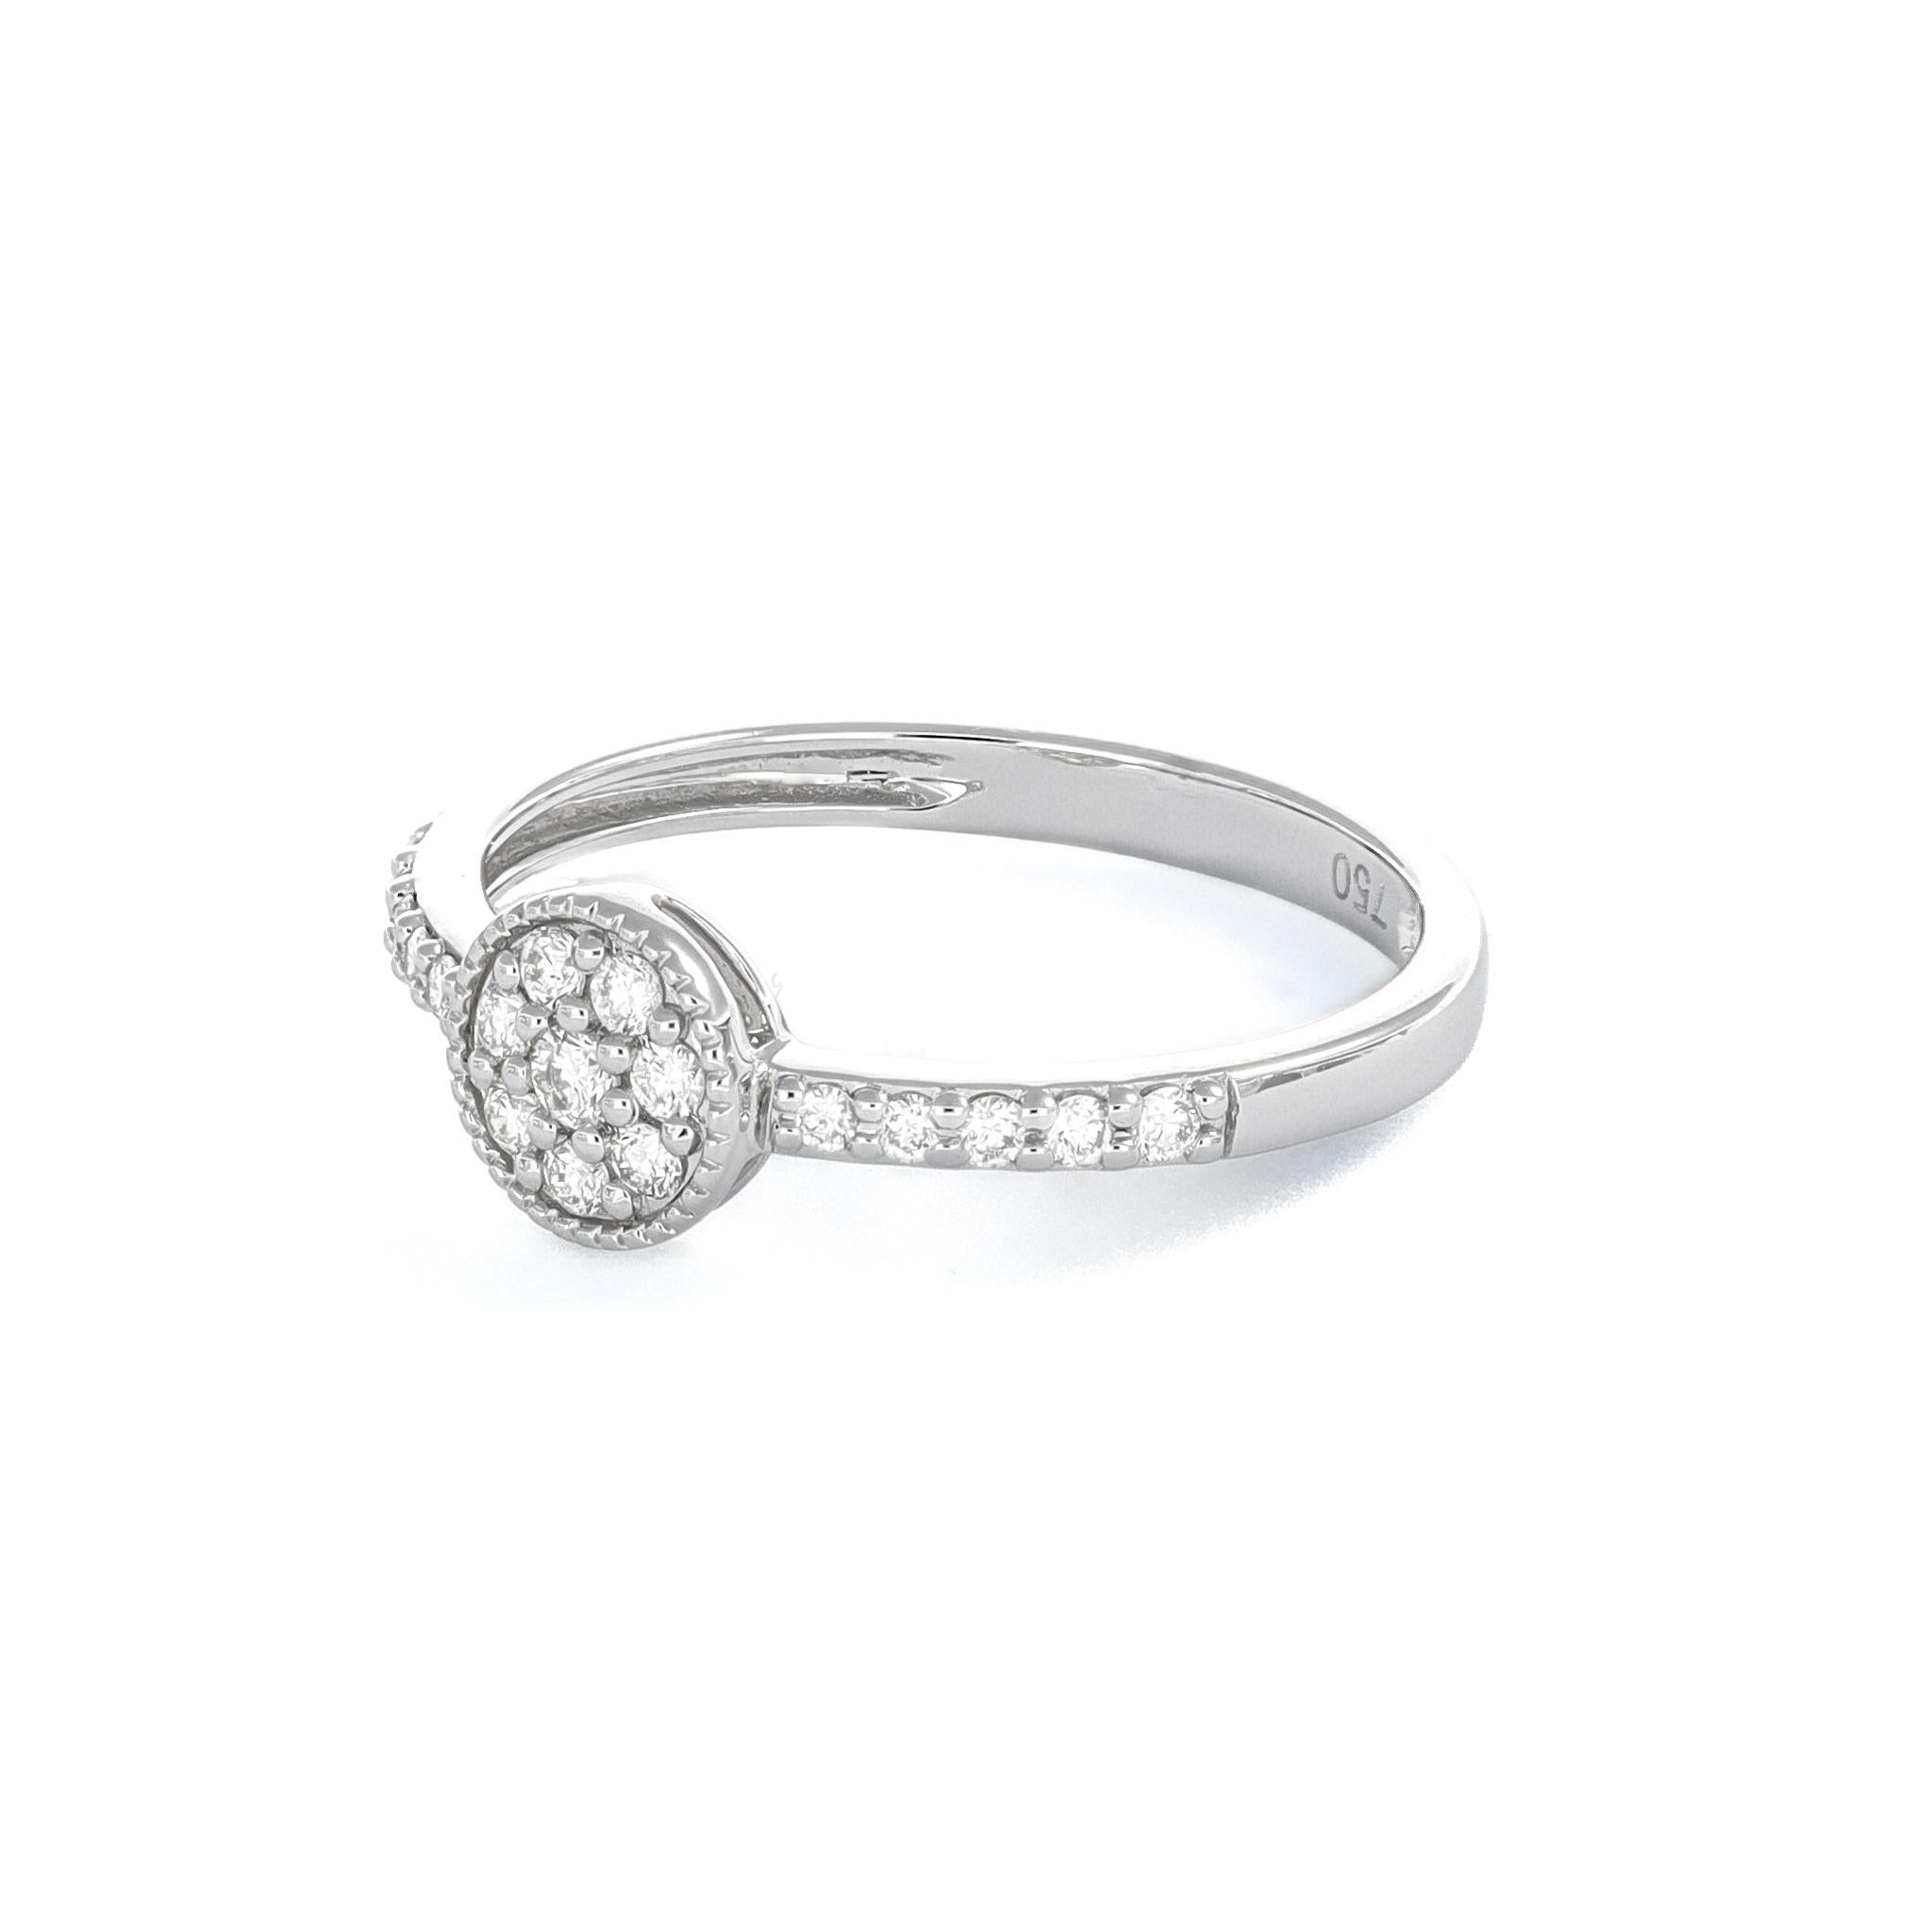 This minimalist white diamond ring embodies understated elegance with its simple cluster set design and accented shanks, making it an ideal choice for both everyday wear and thoughtful gifting.

With a total carat weight of 0.27, the diamonds are